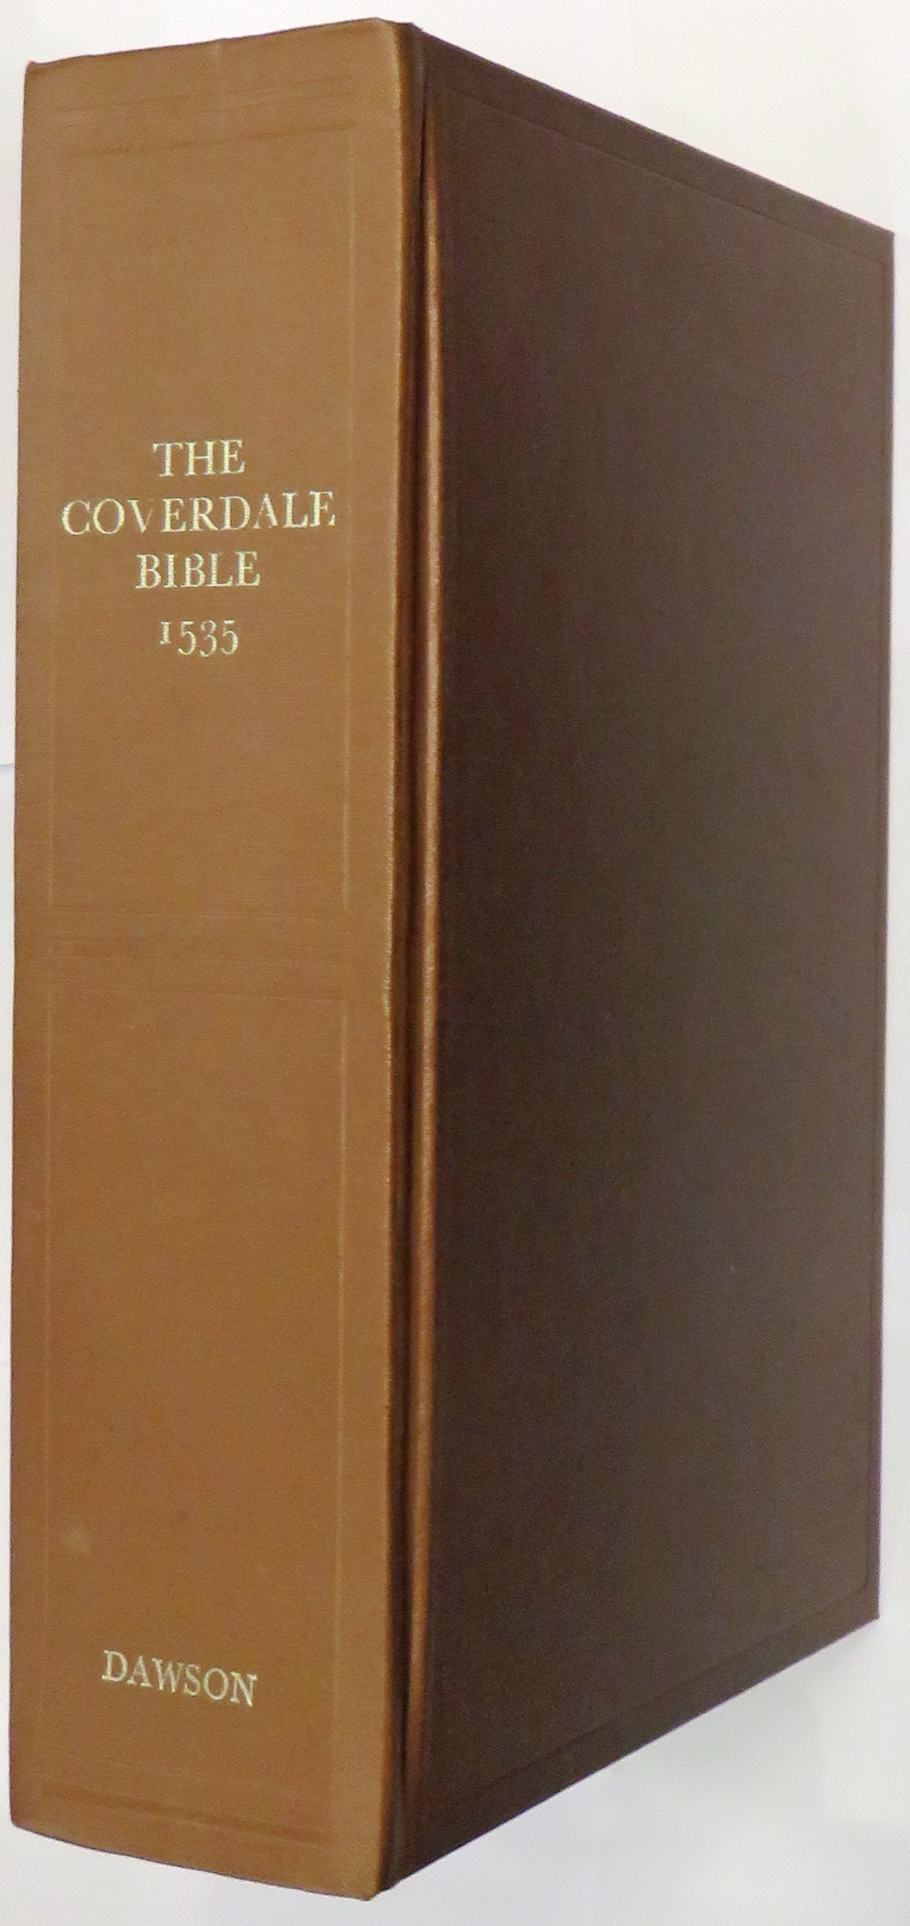 The Coverdale Bible 1535